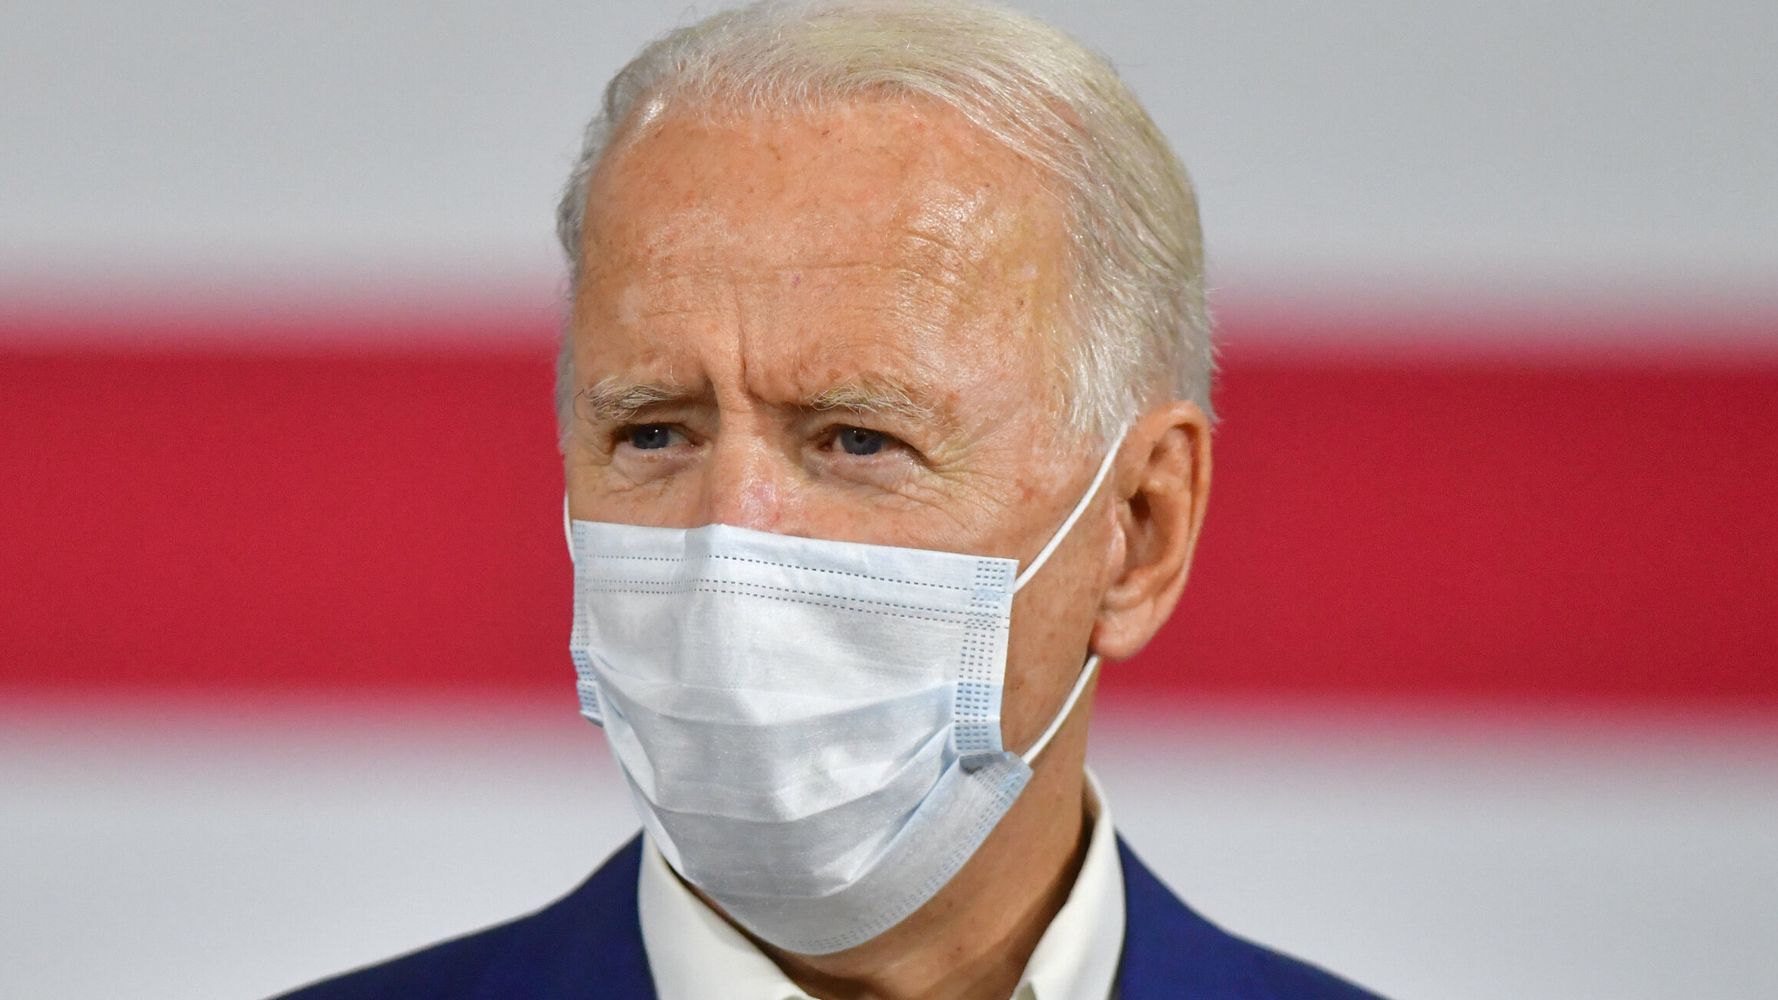 Biden Will Reportedly Begin Calling Mayors, Governors To Urge Mask Mandates